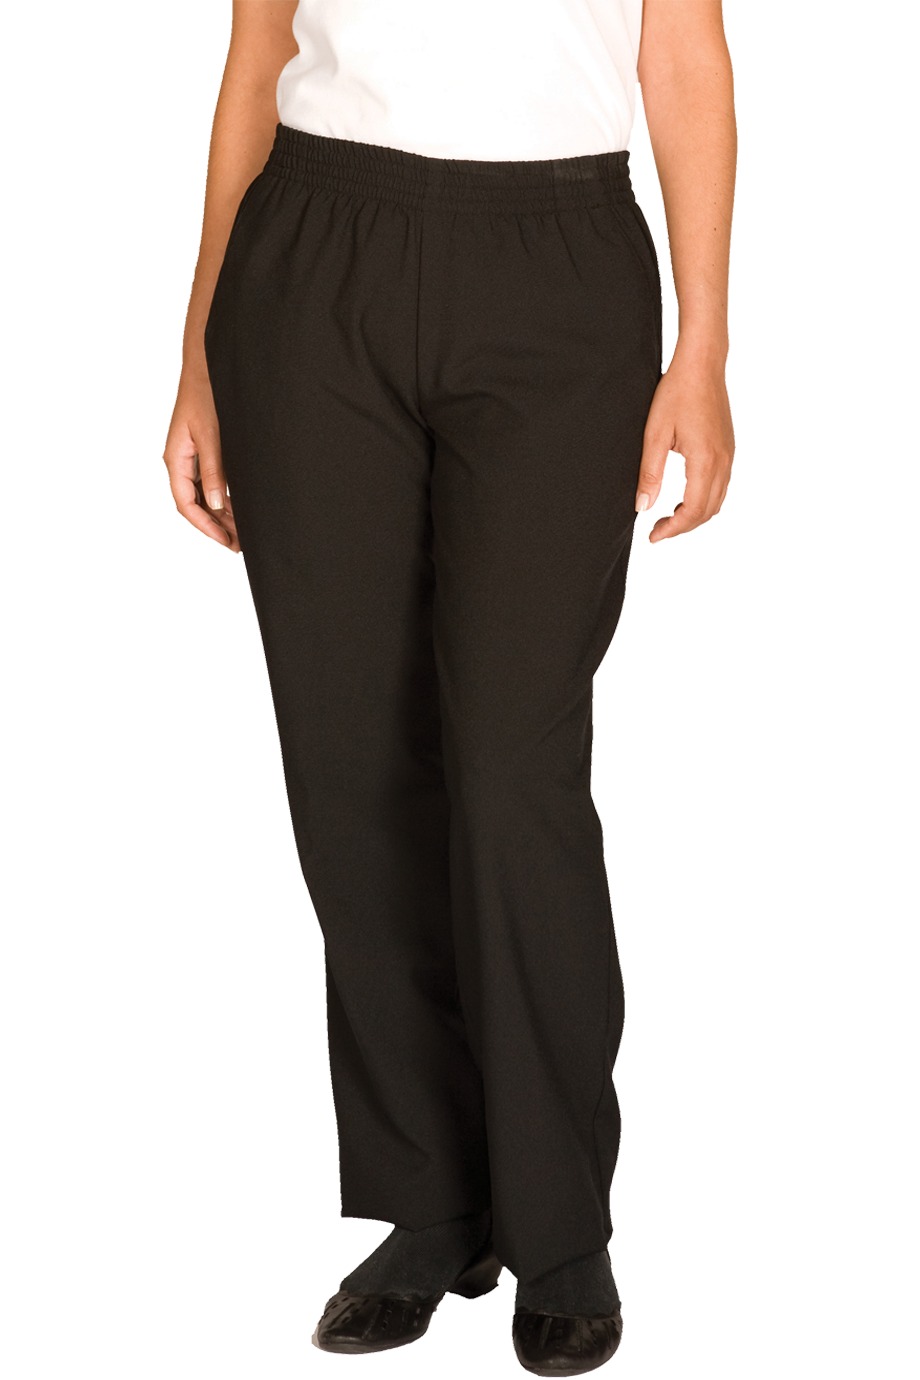 Edwards Garment 8888 - Women's Solid Pull-On-Pant